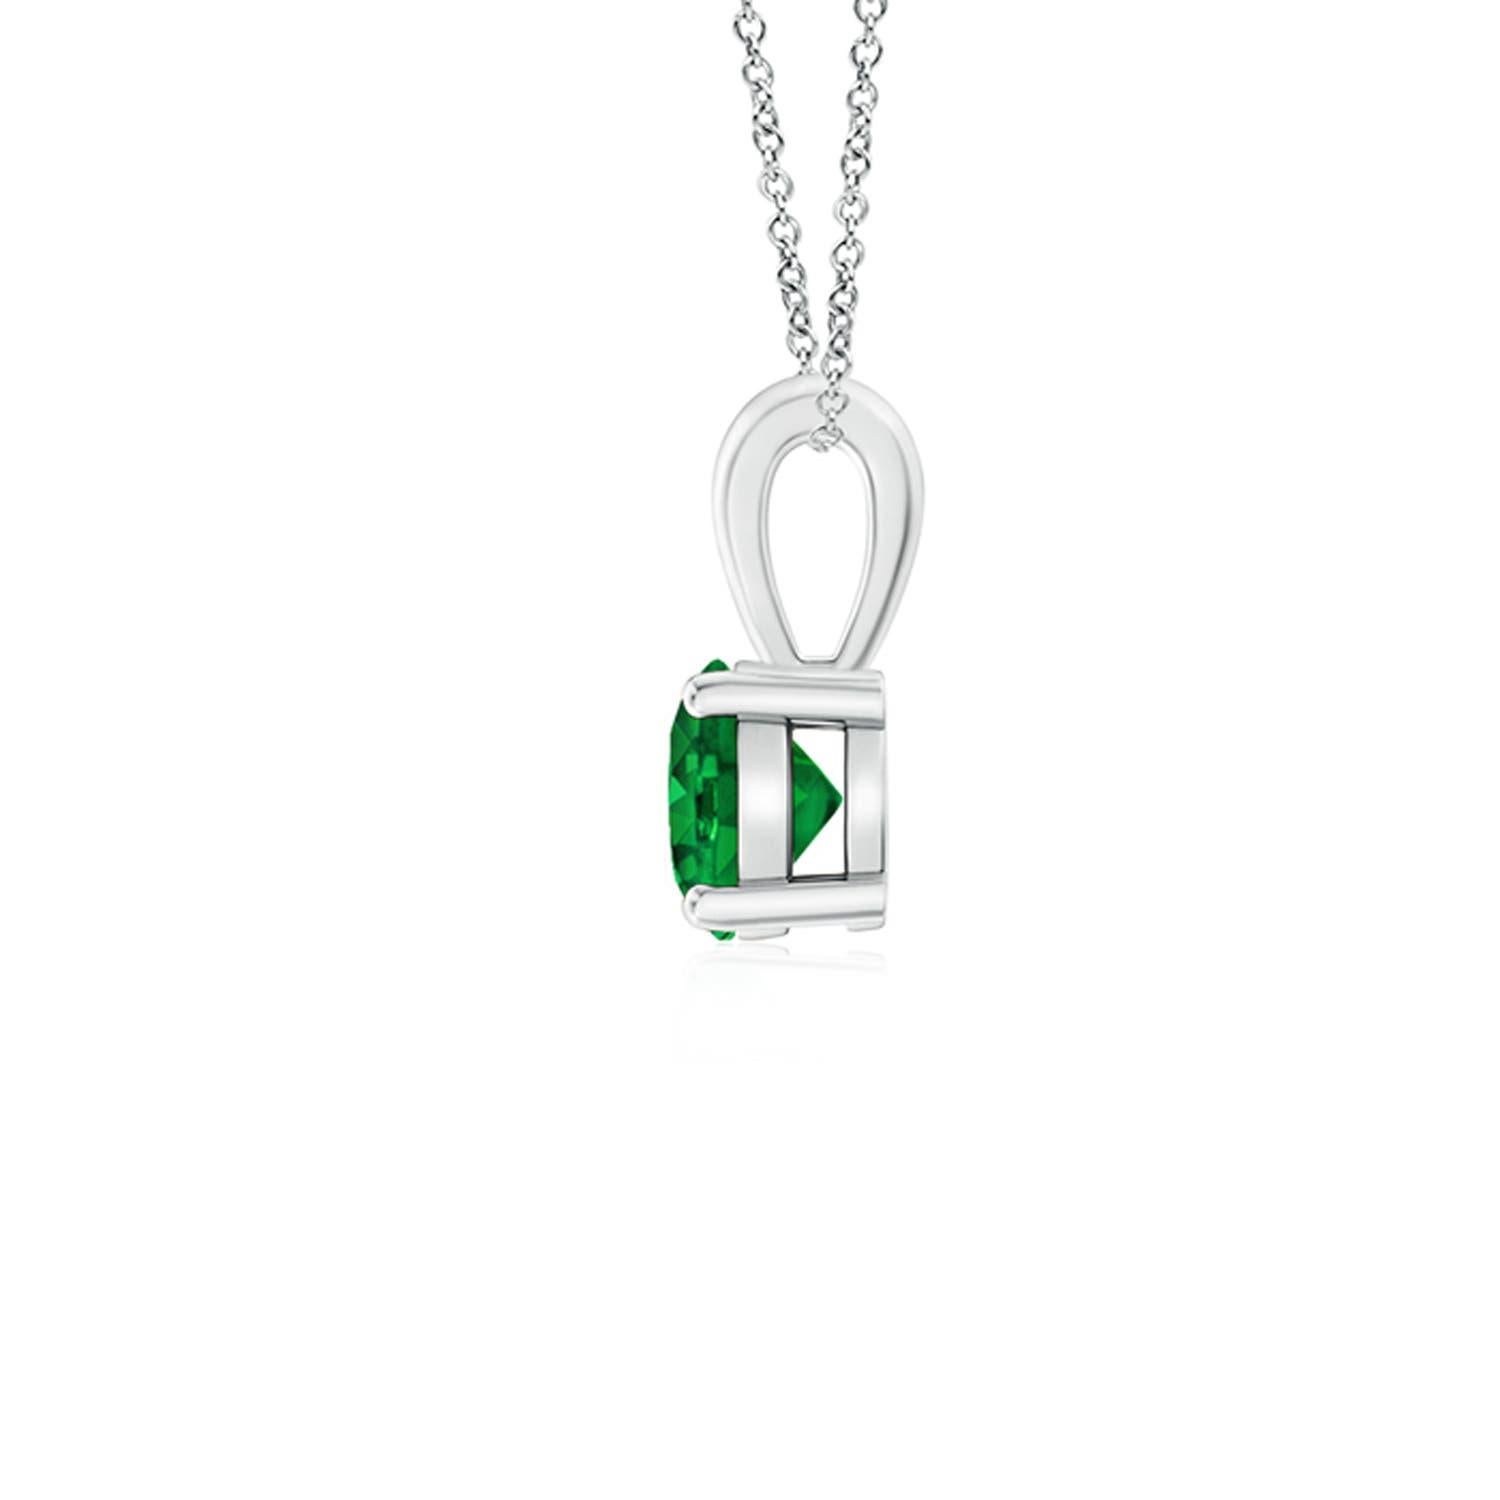 Linked to a lustrous bale is a lush green emerald solitaire secured in a four prong setting. Crafted in 14k white gold, the elegant design of this classic emerald pendant draws all attention towards the magnificence of the center stone.
Emerald is